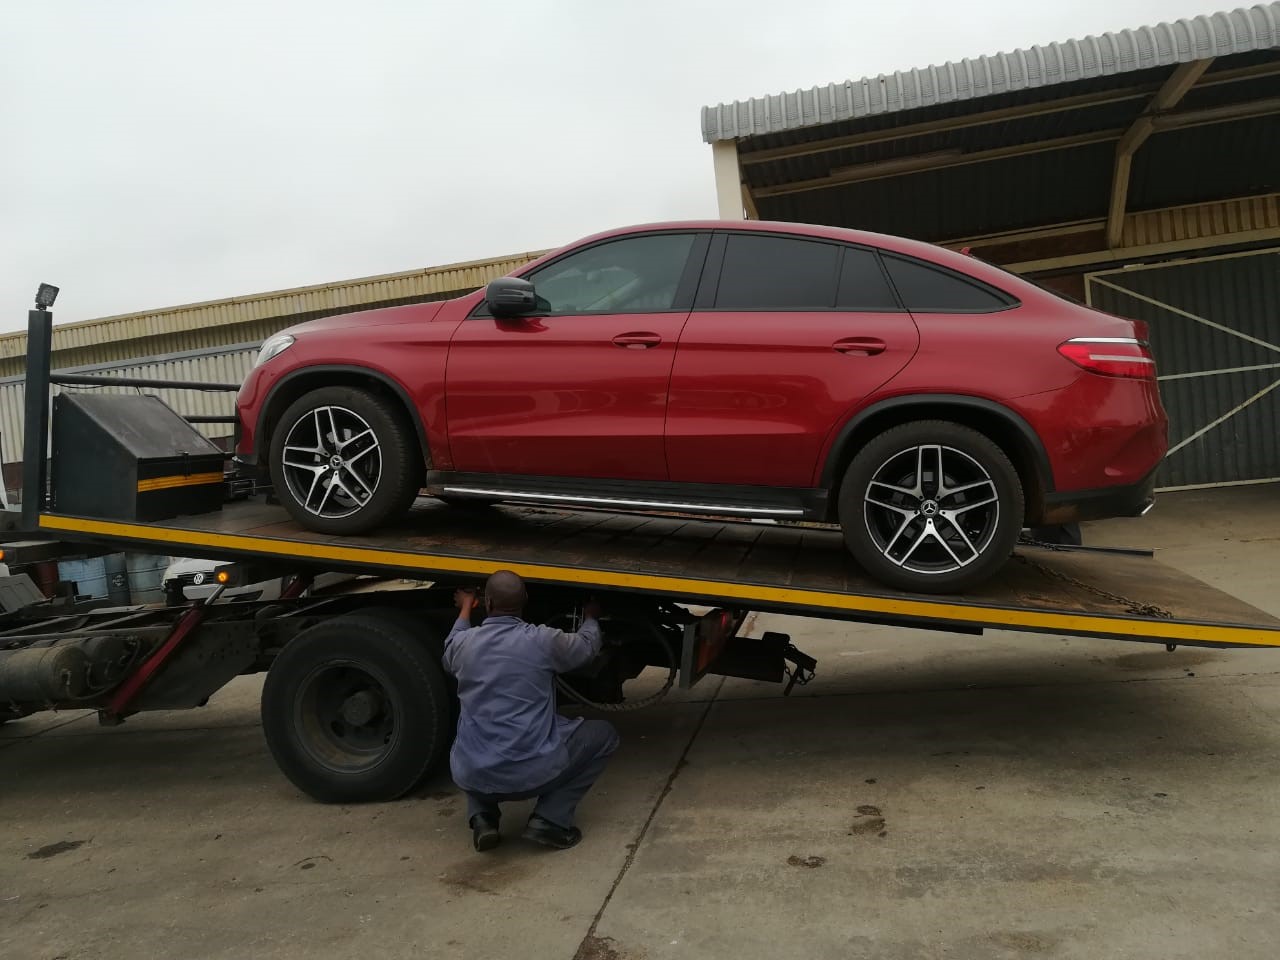 Hawks seize vehicle worth R1.4 million following allegations of corruption in Limpopo